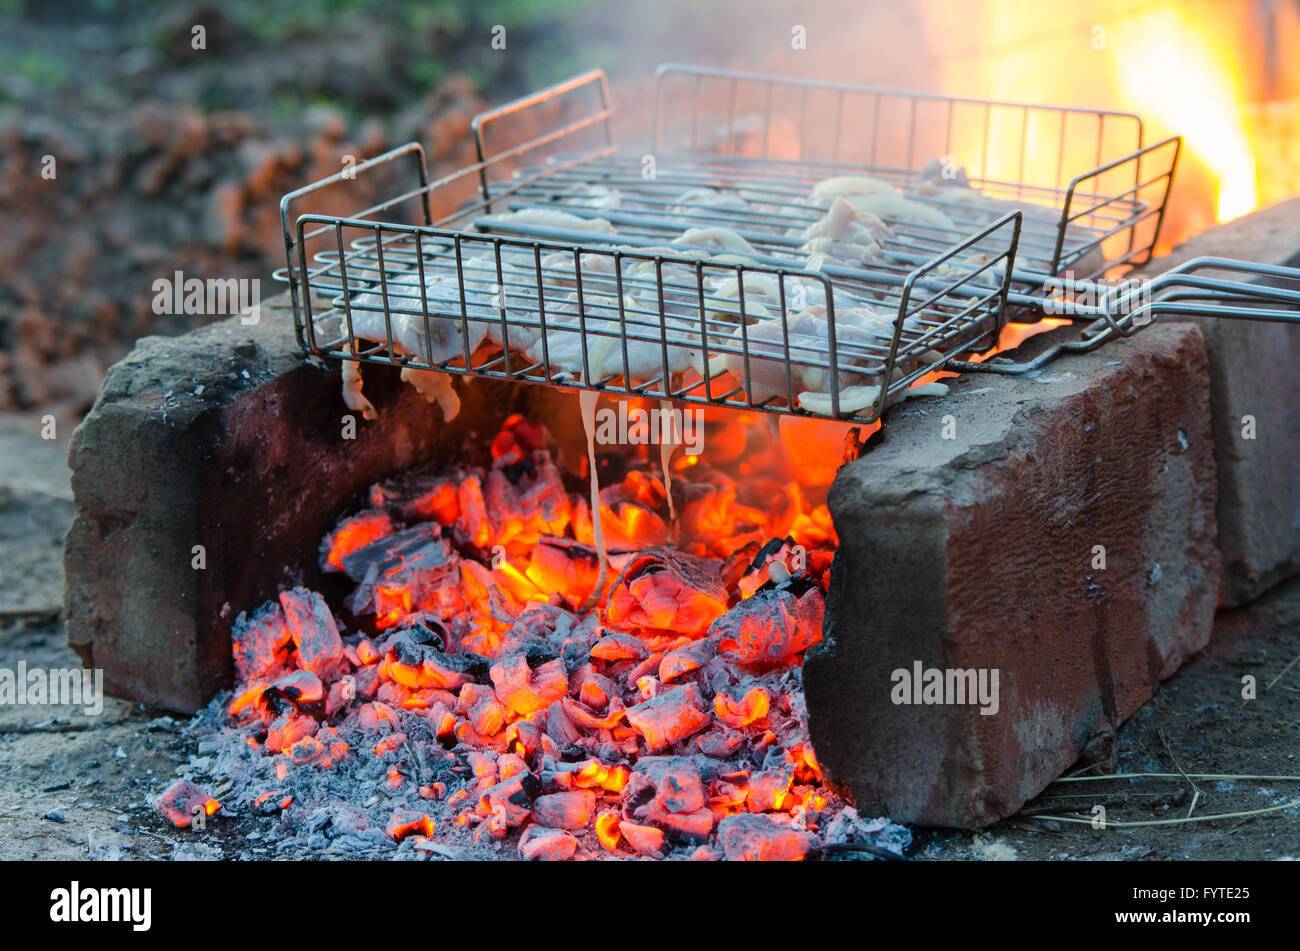 Chicken meat baked in the fire on the grill grate Stock Photo